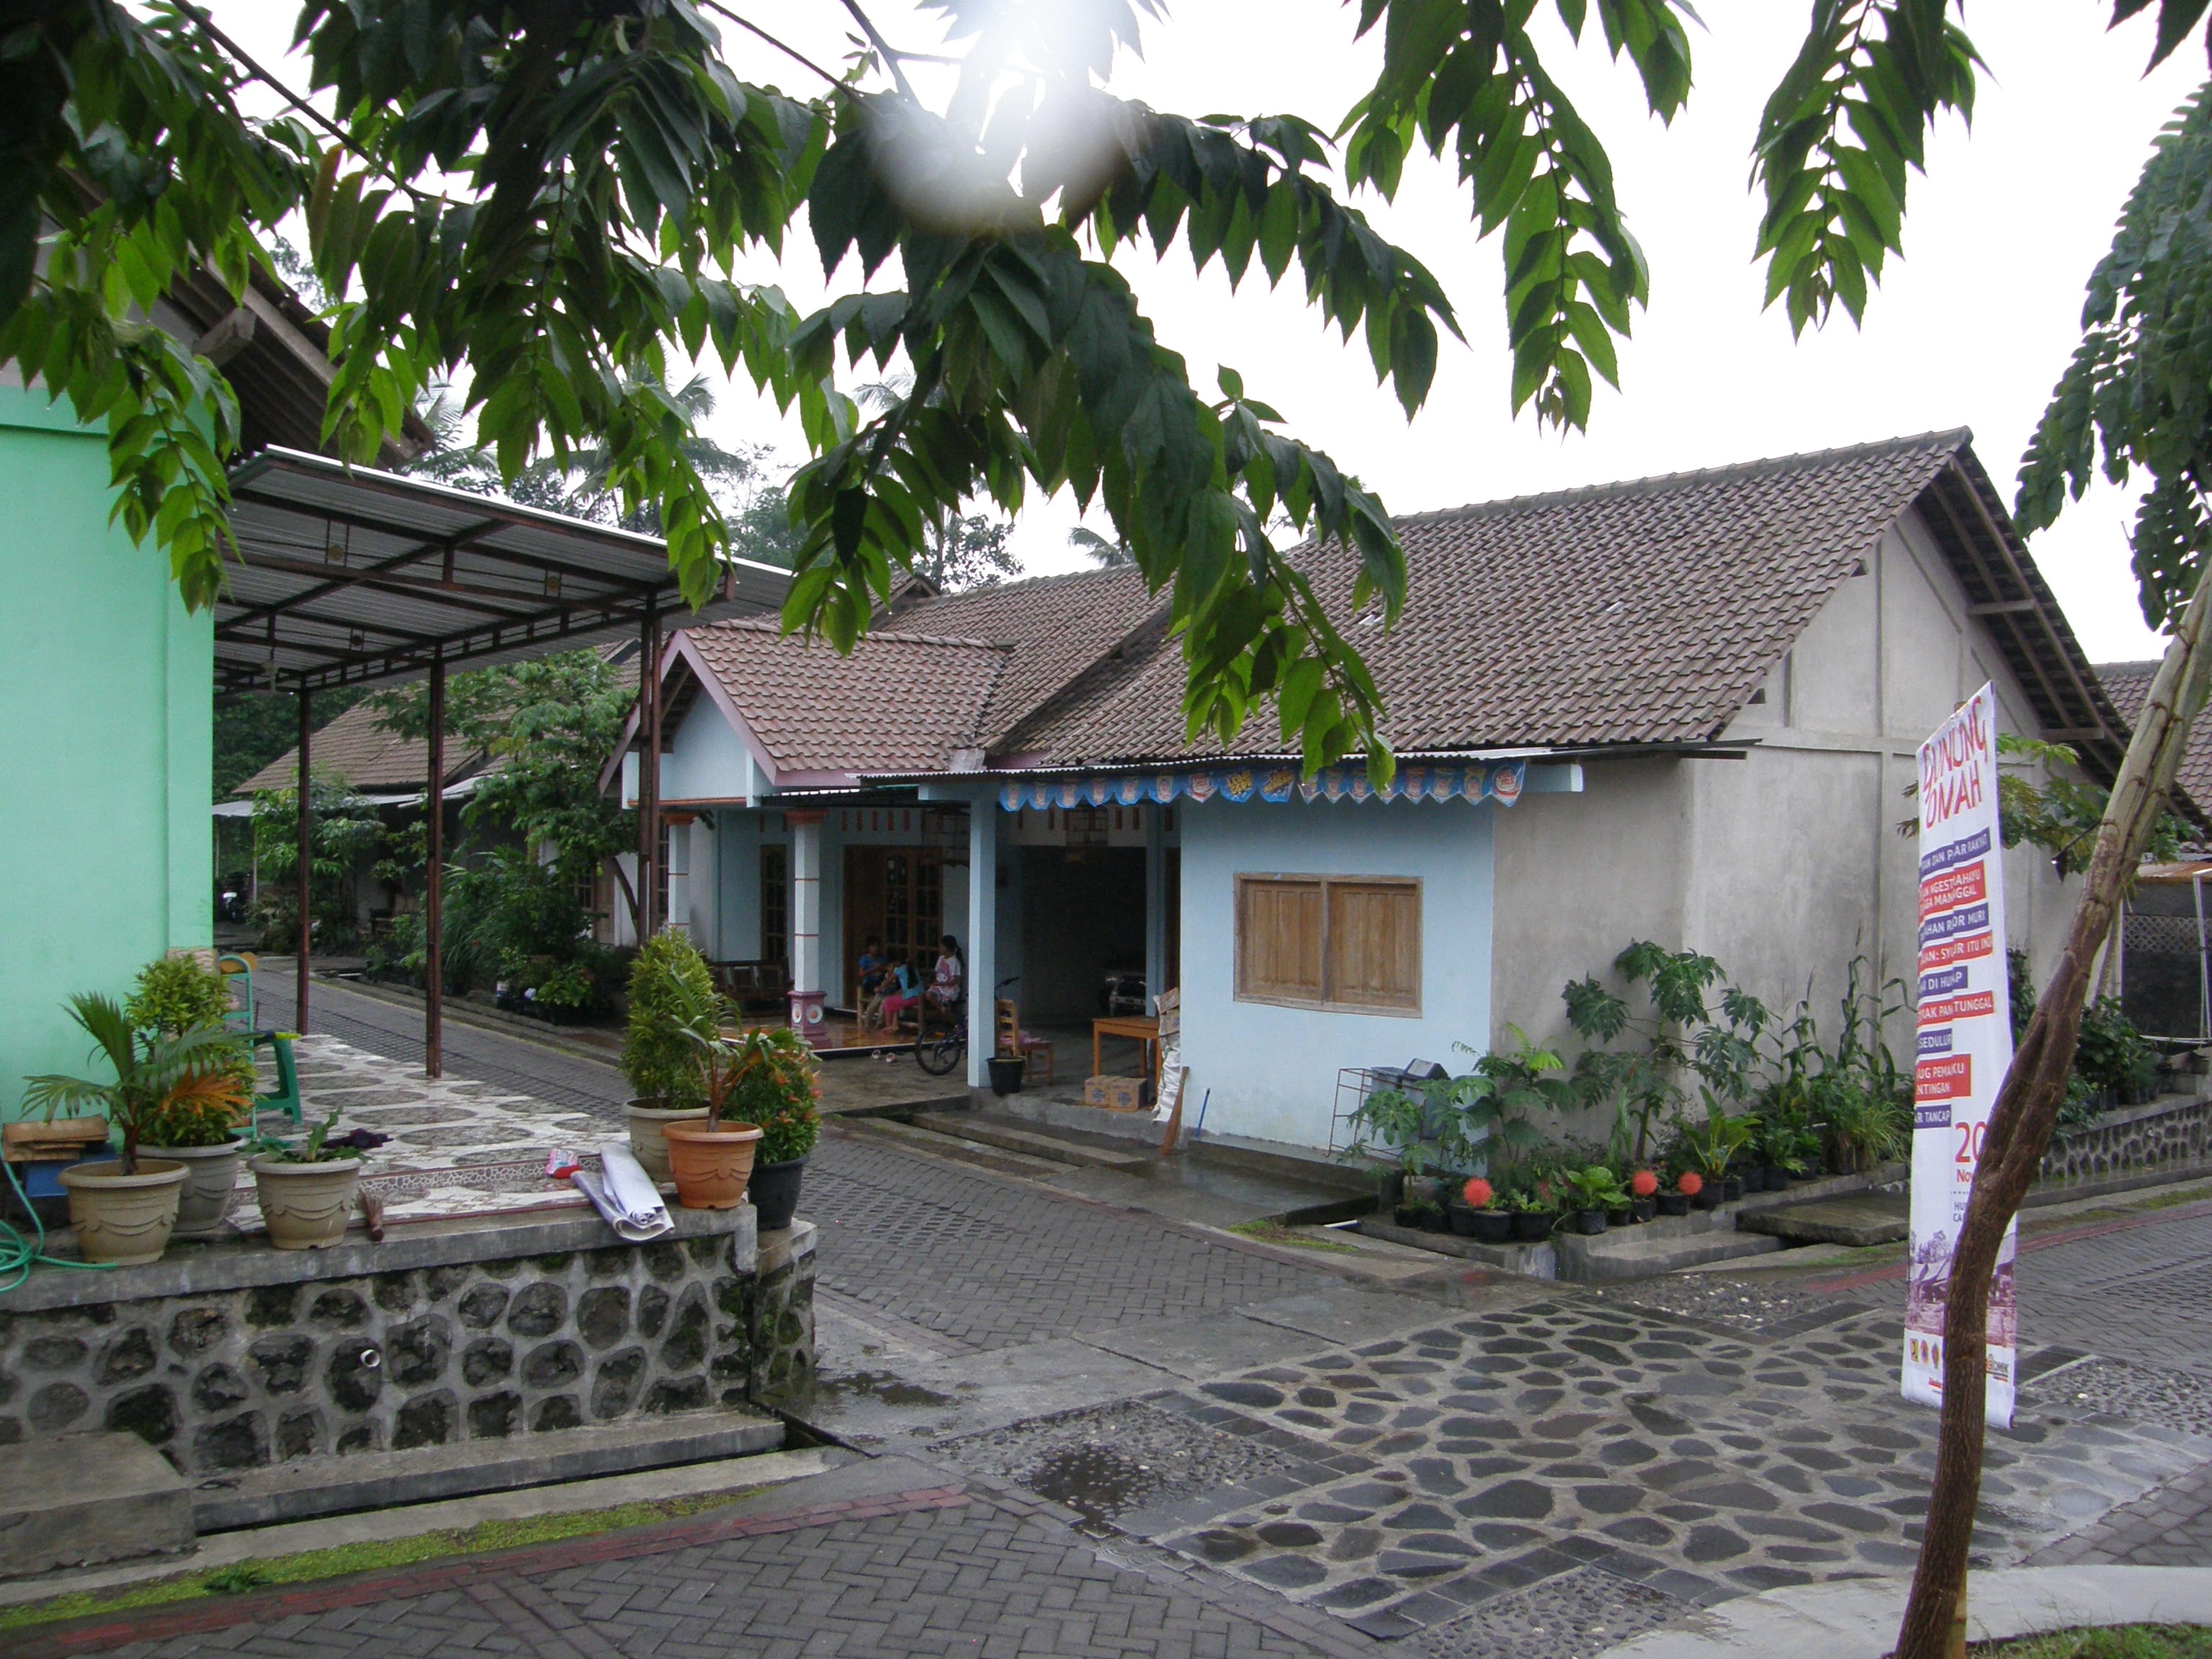 New village built to house relocated village following the 2010 eruption of Merapi